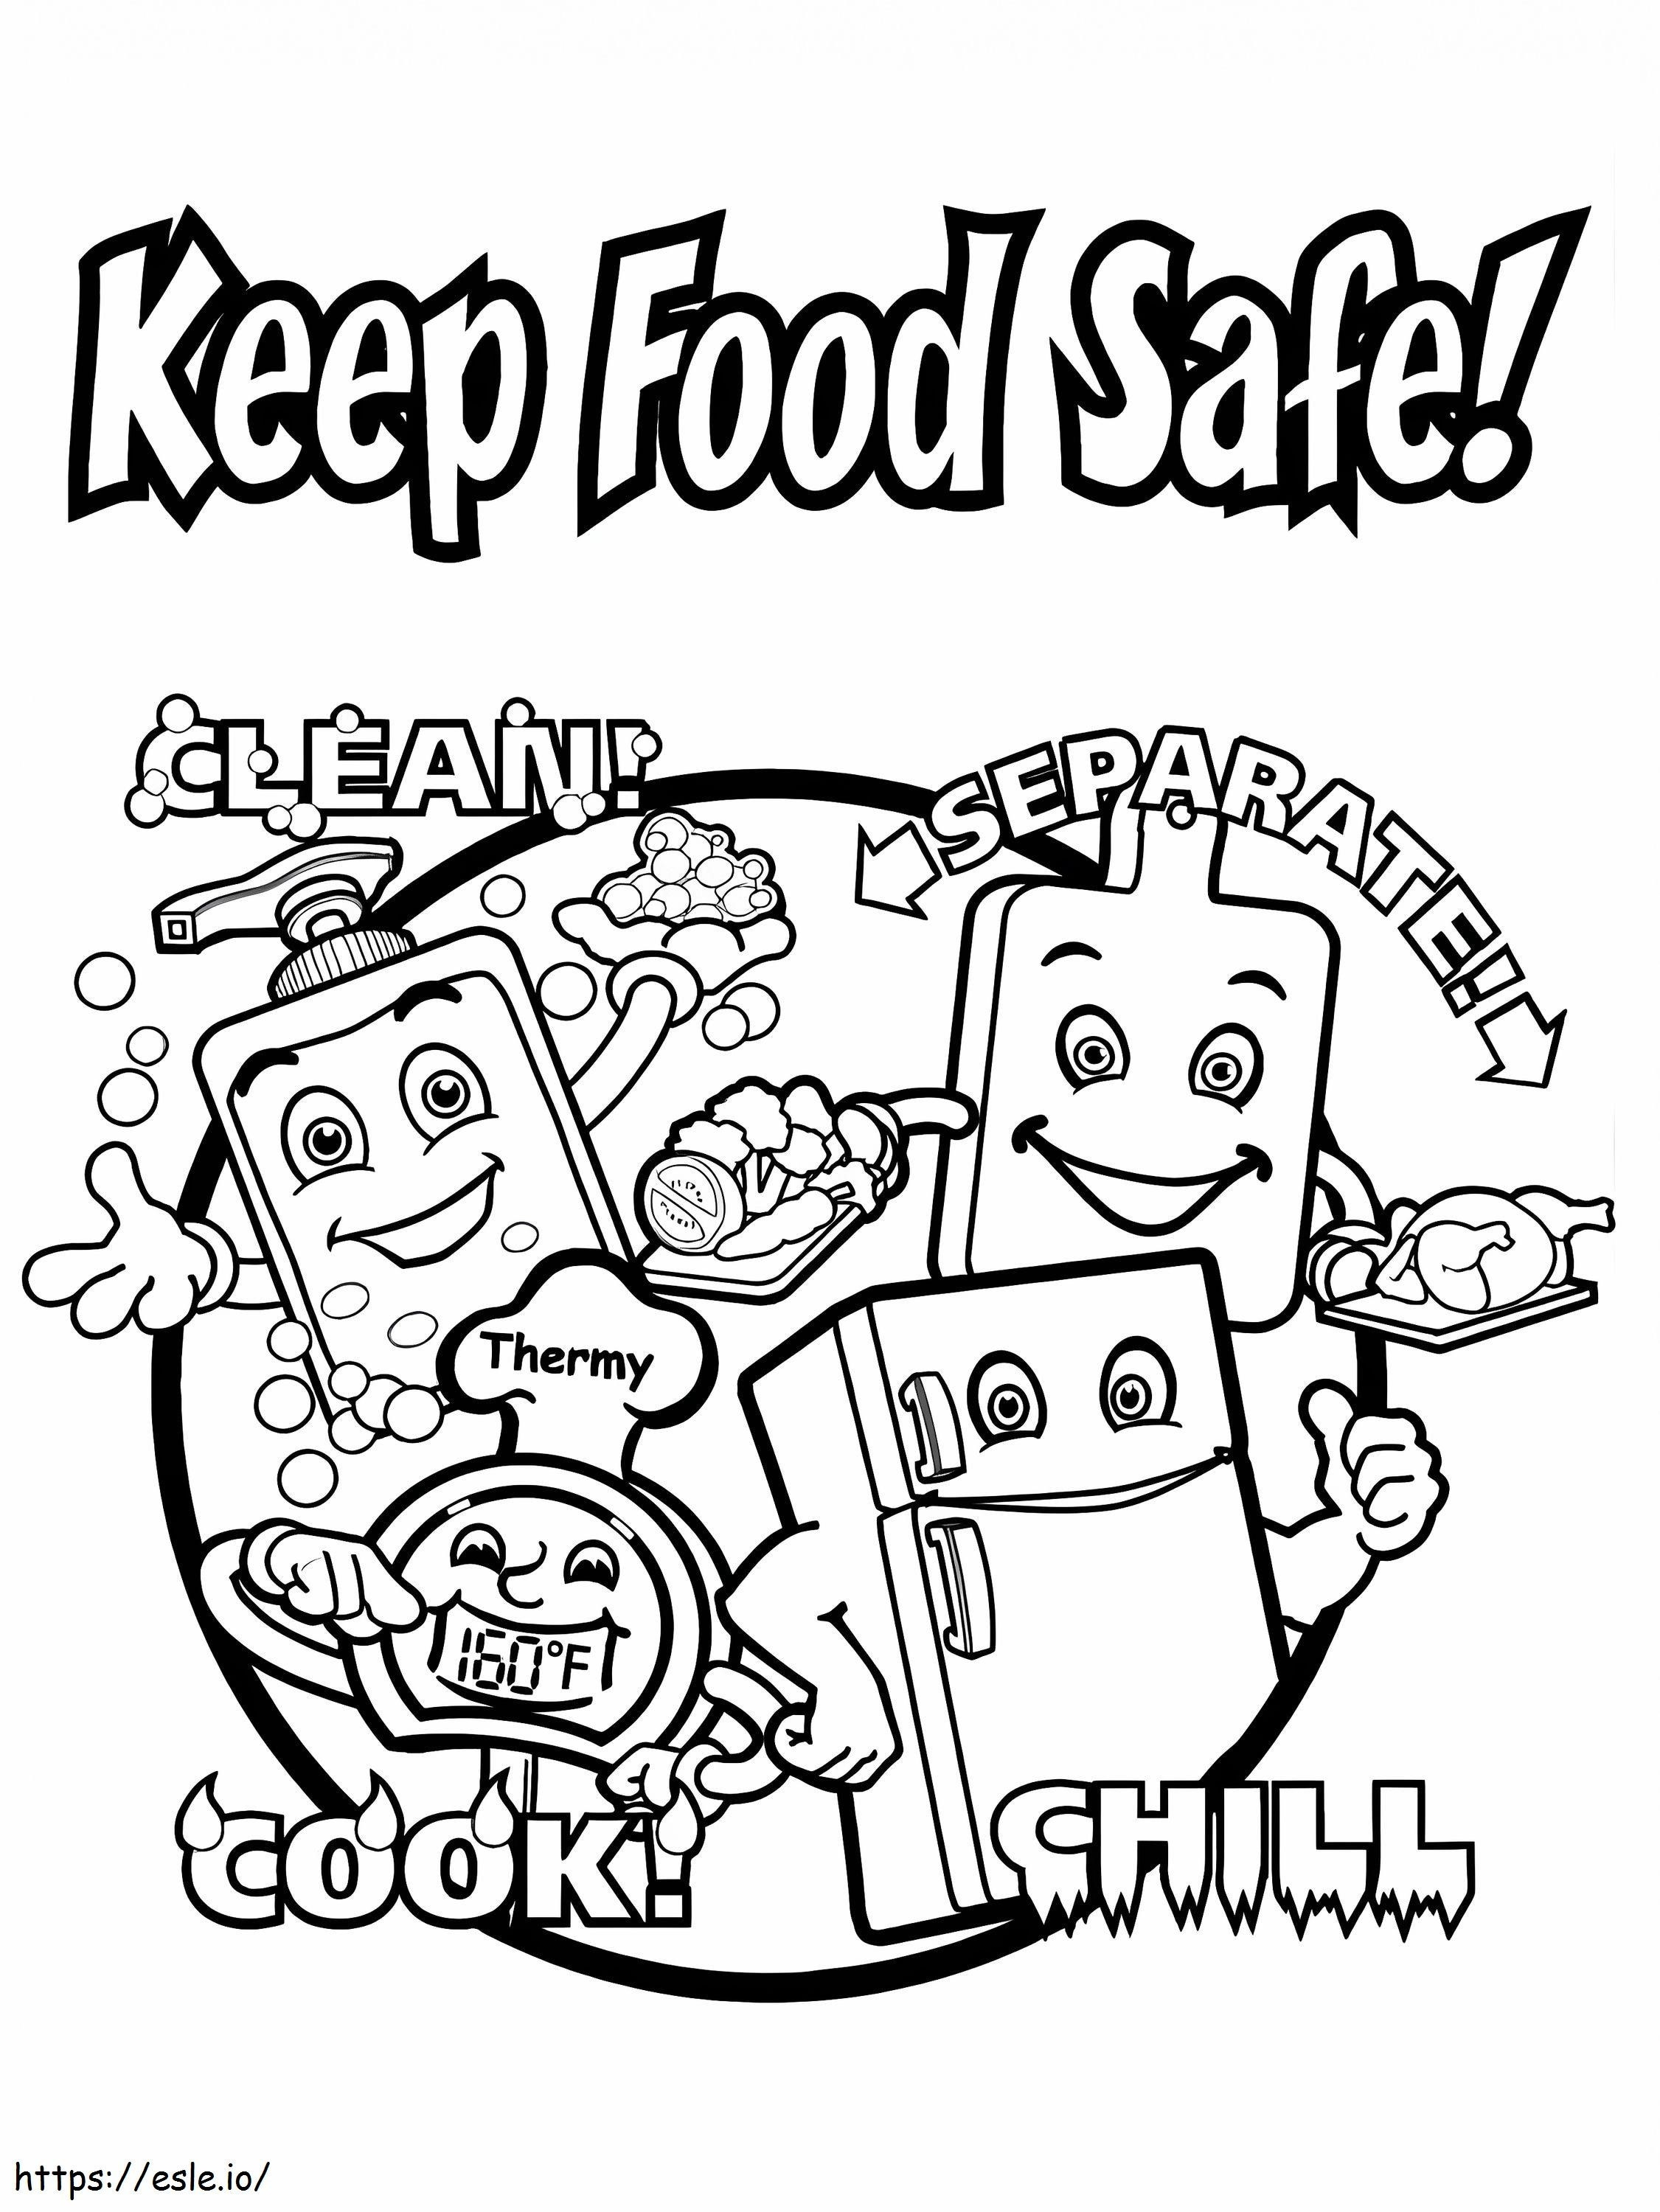 Keep Food Safe coloring page